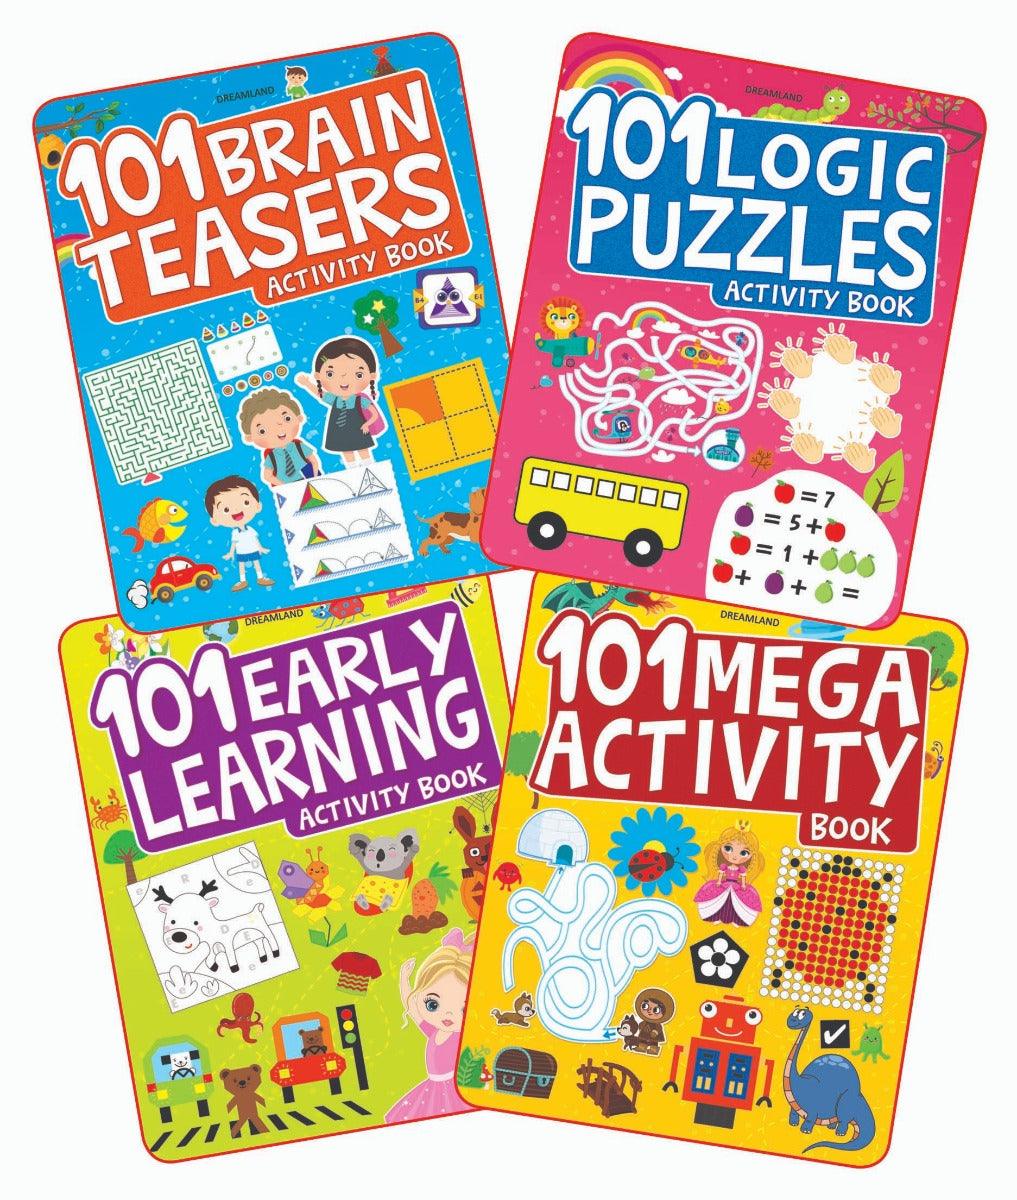 Dreamland 101 Activity Books - An Interactive & Activity Book For Kids - Set of 4 Books(English)